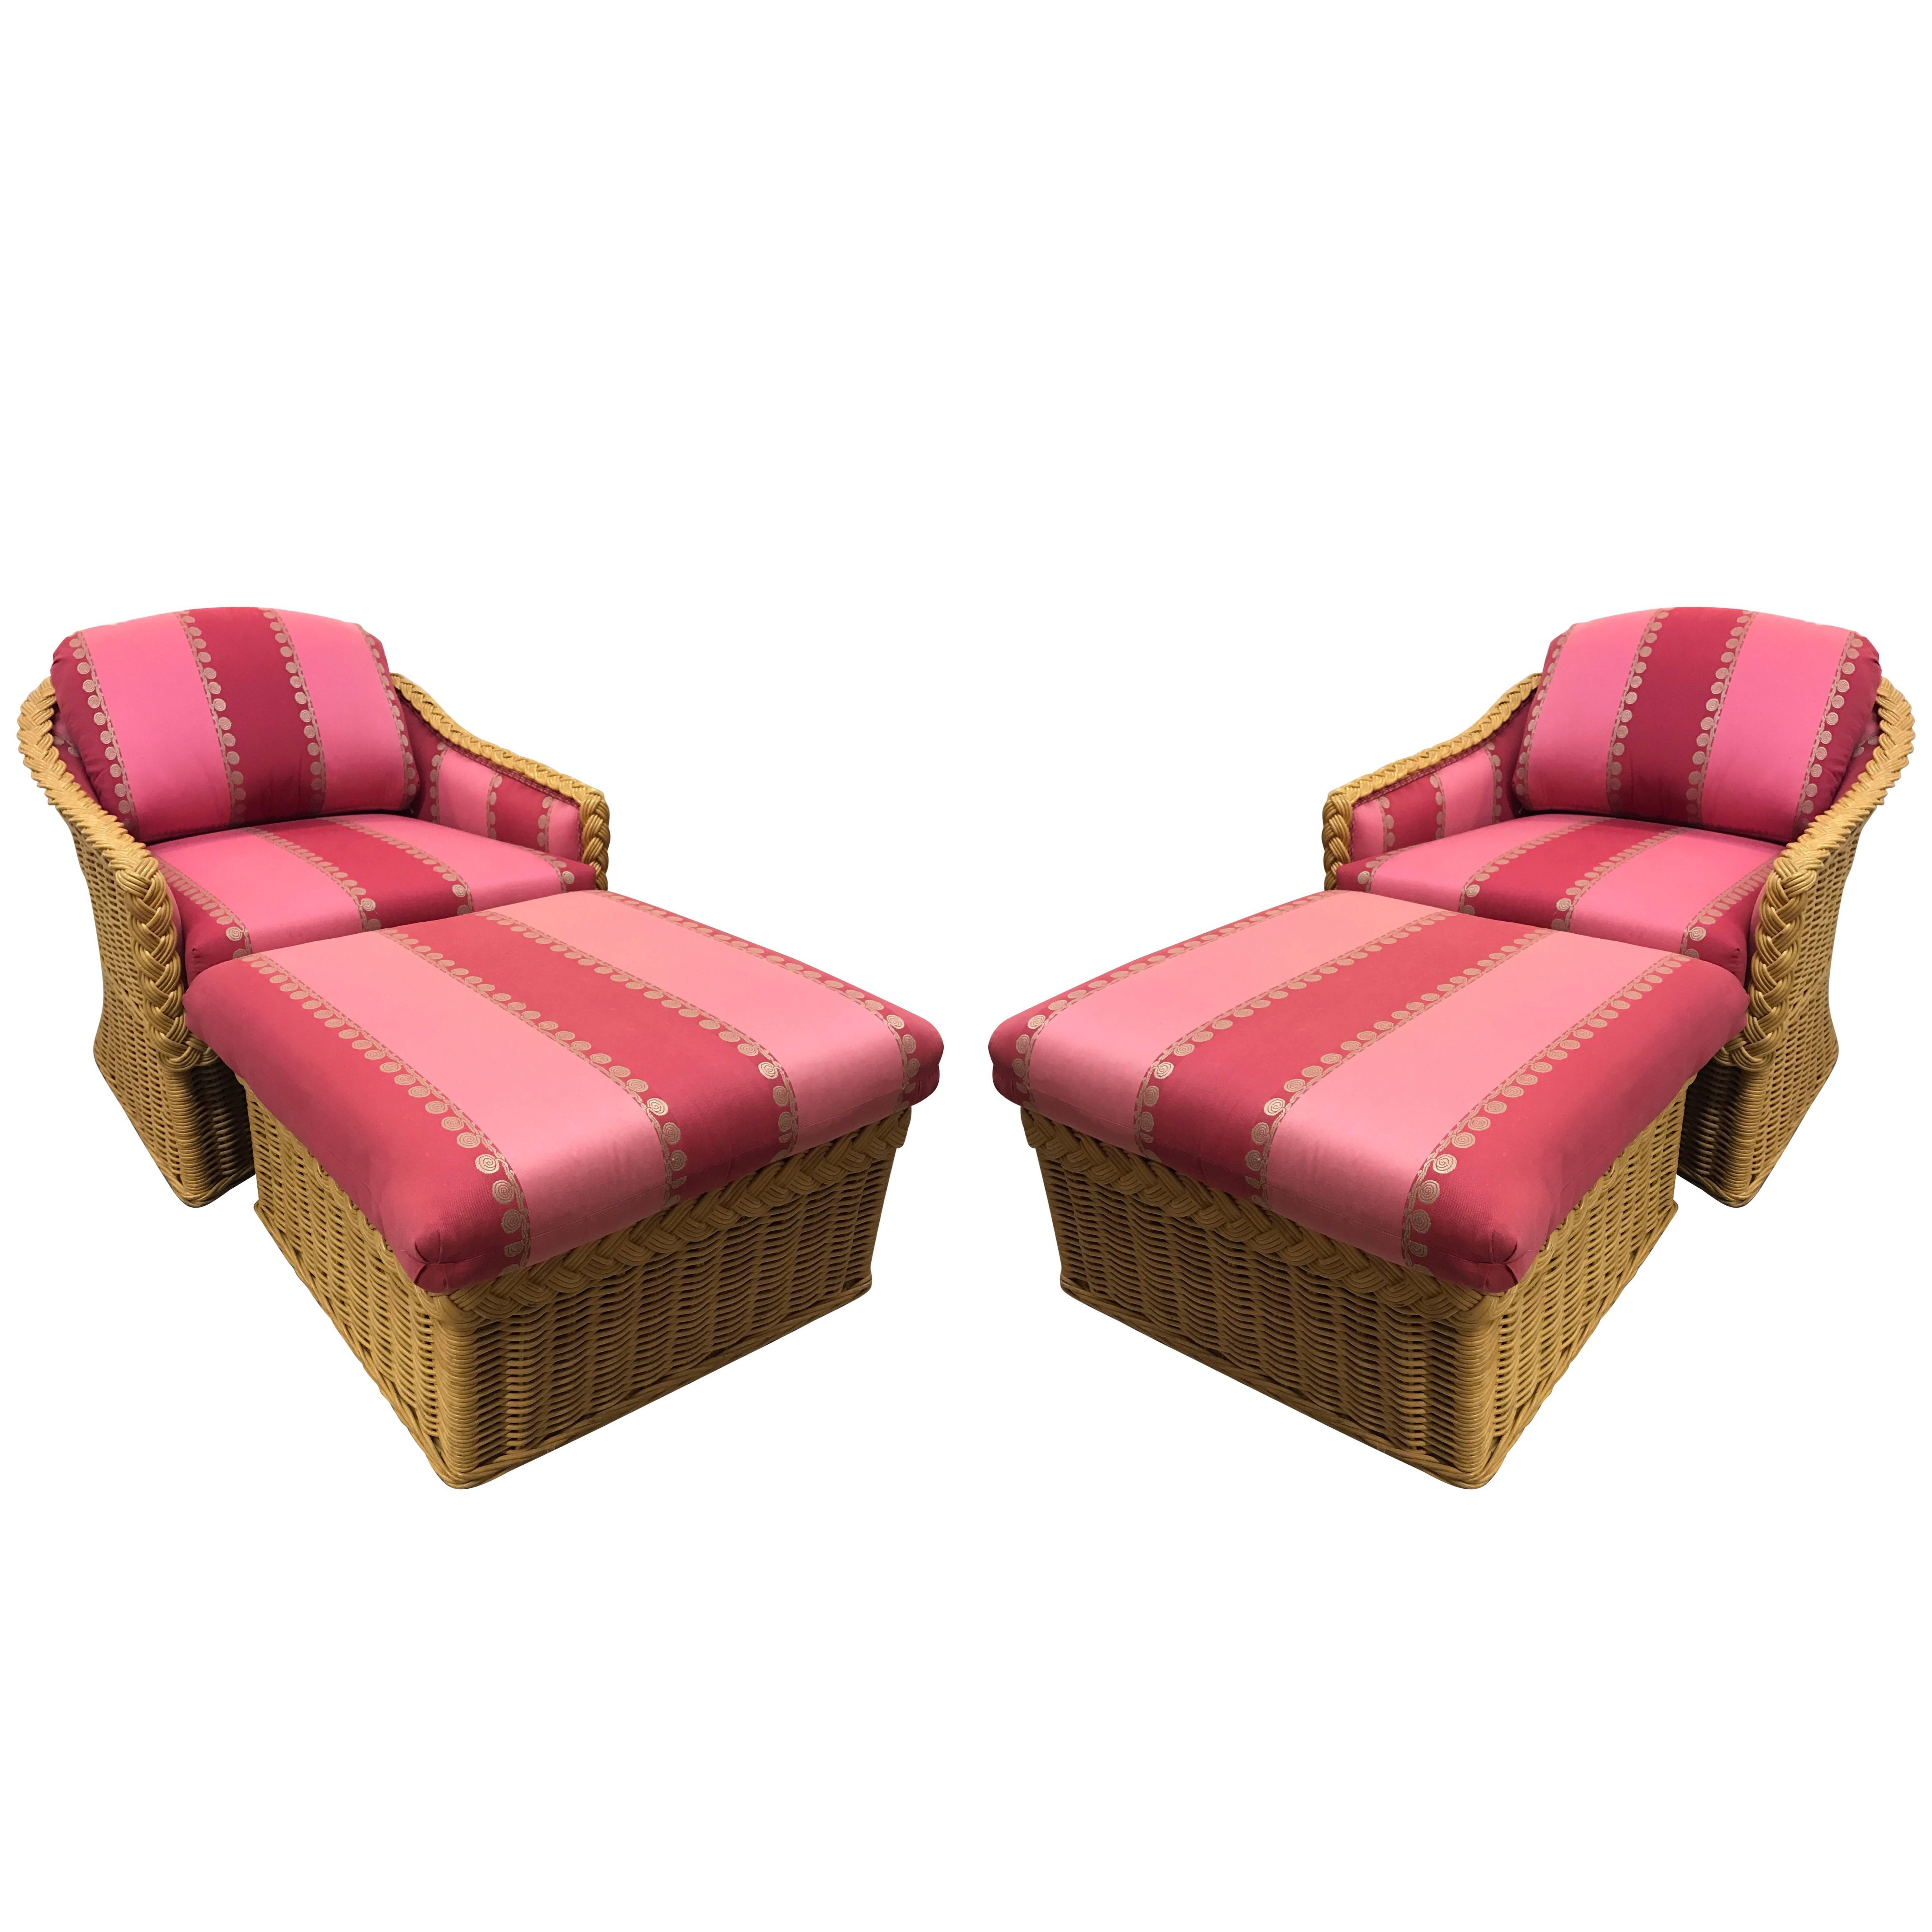 Pair of Mid-Century Modern Pink Rasberry Wicker Lounge Chair and Ottomans